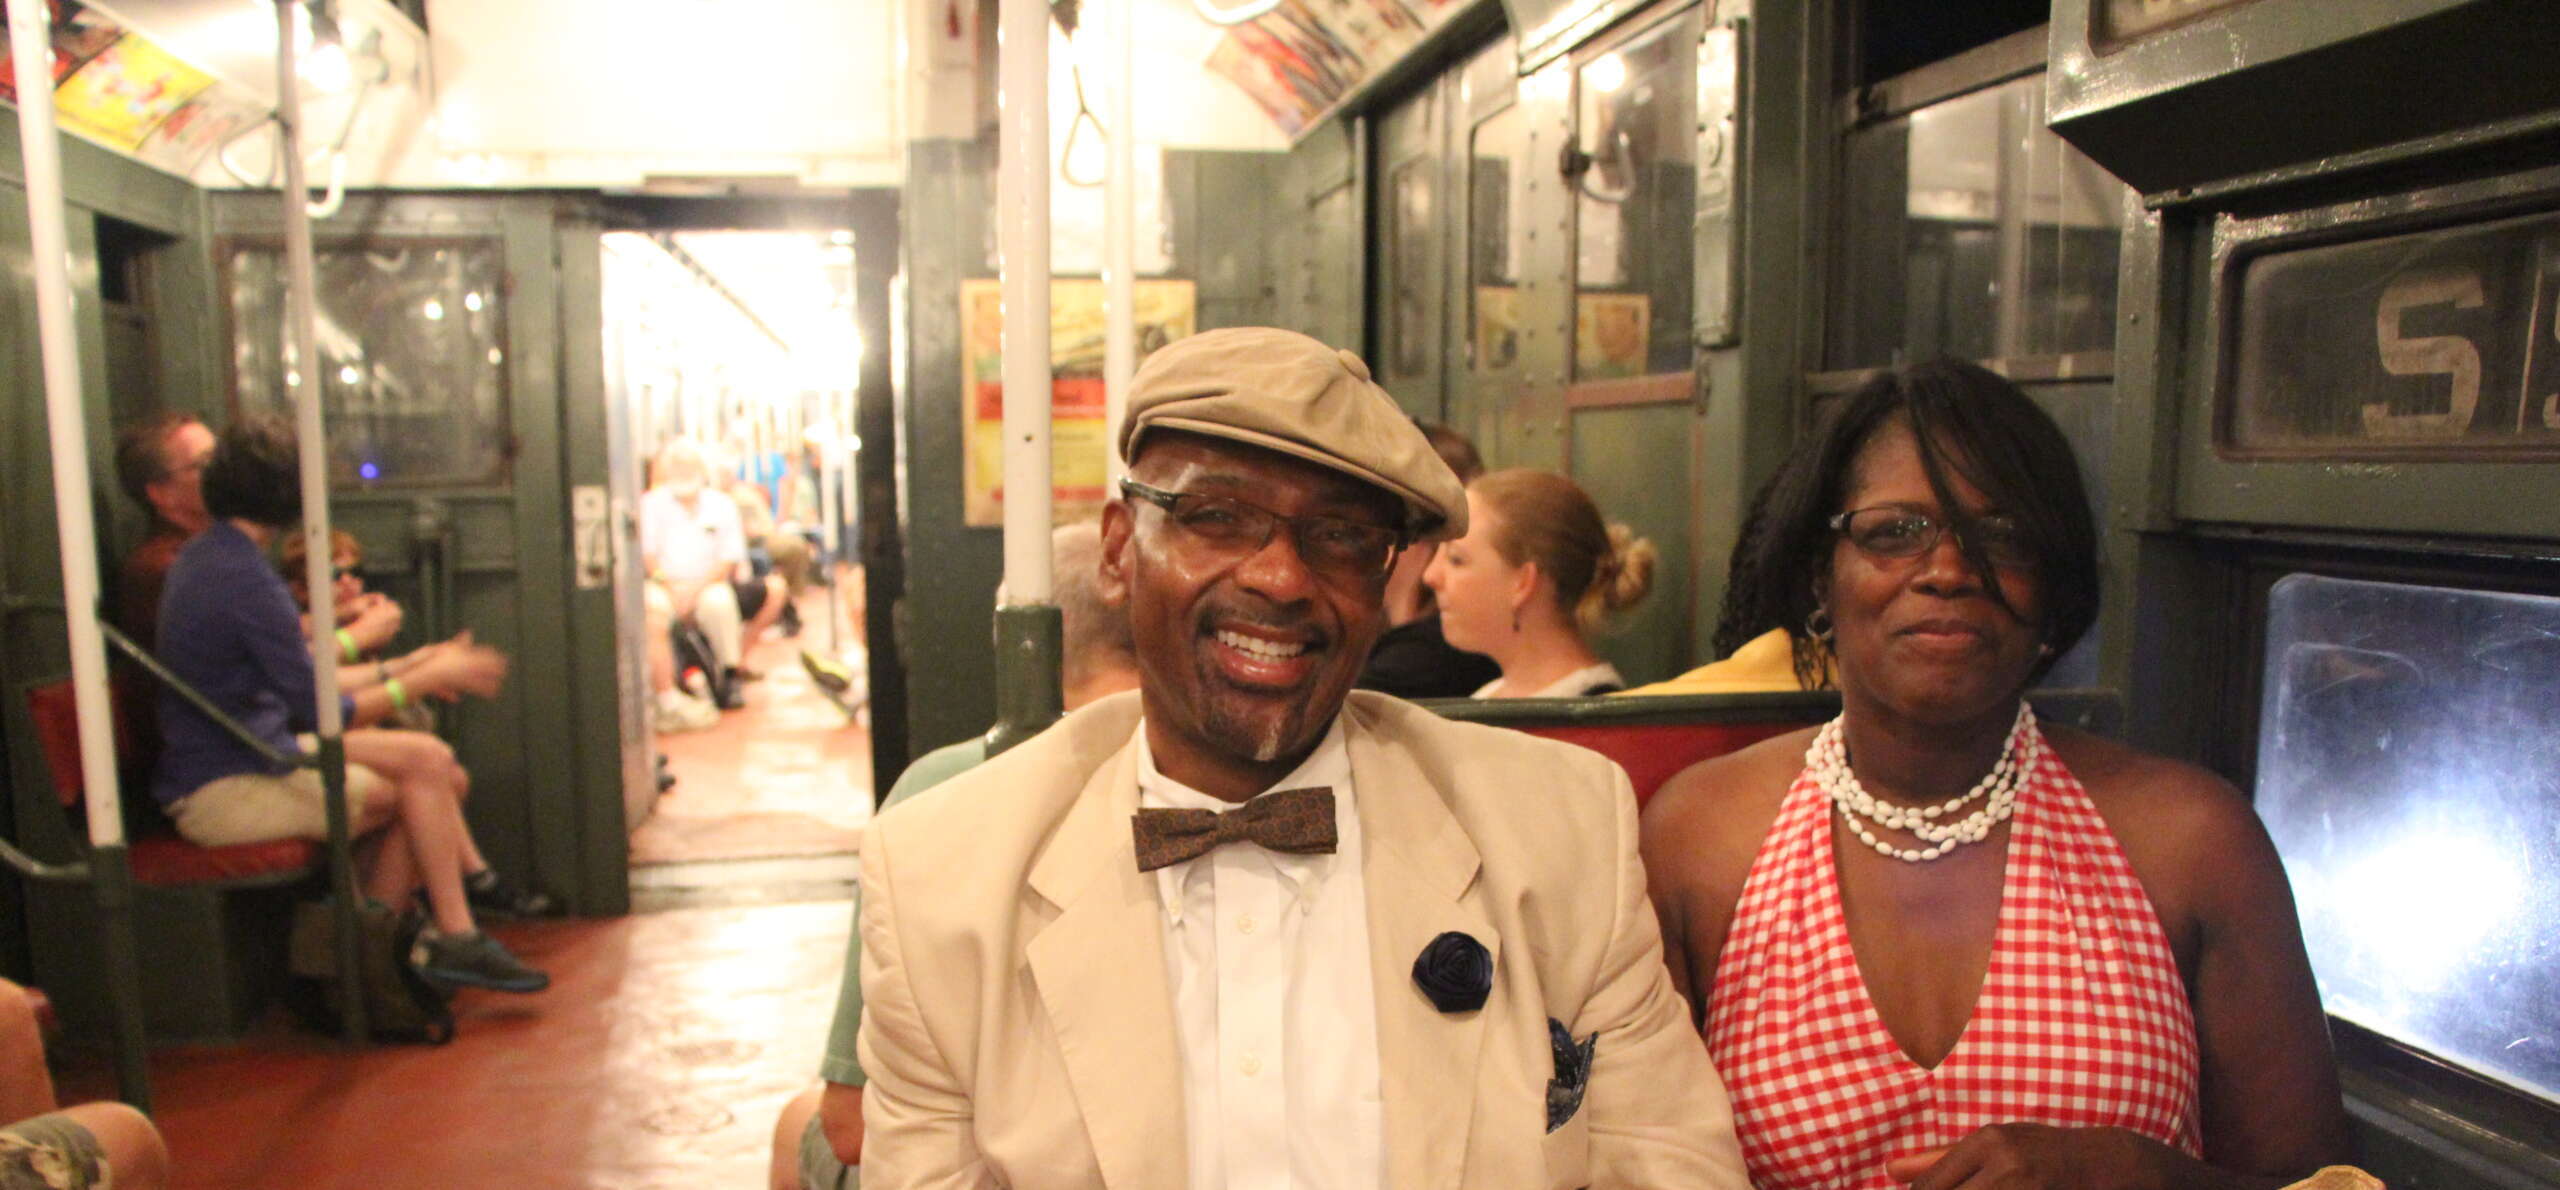 Guests on 1930s R1-9 Train; Photo by James Giovan, Courtesy of the New York Transit Museum